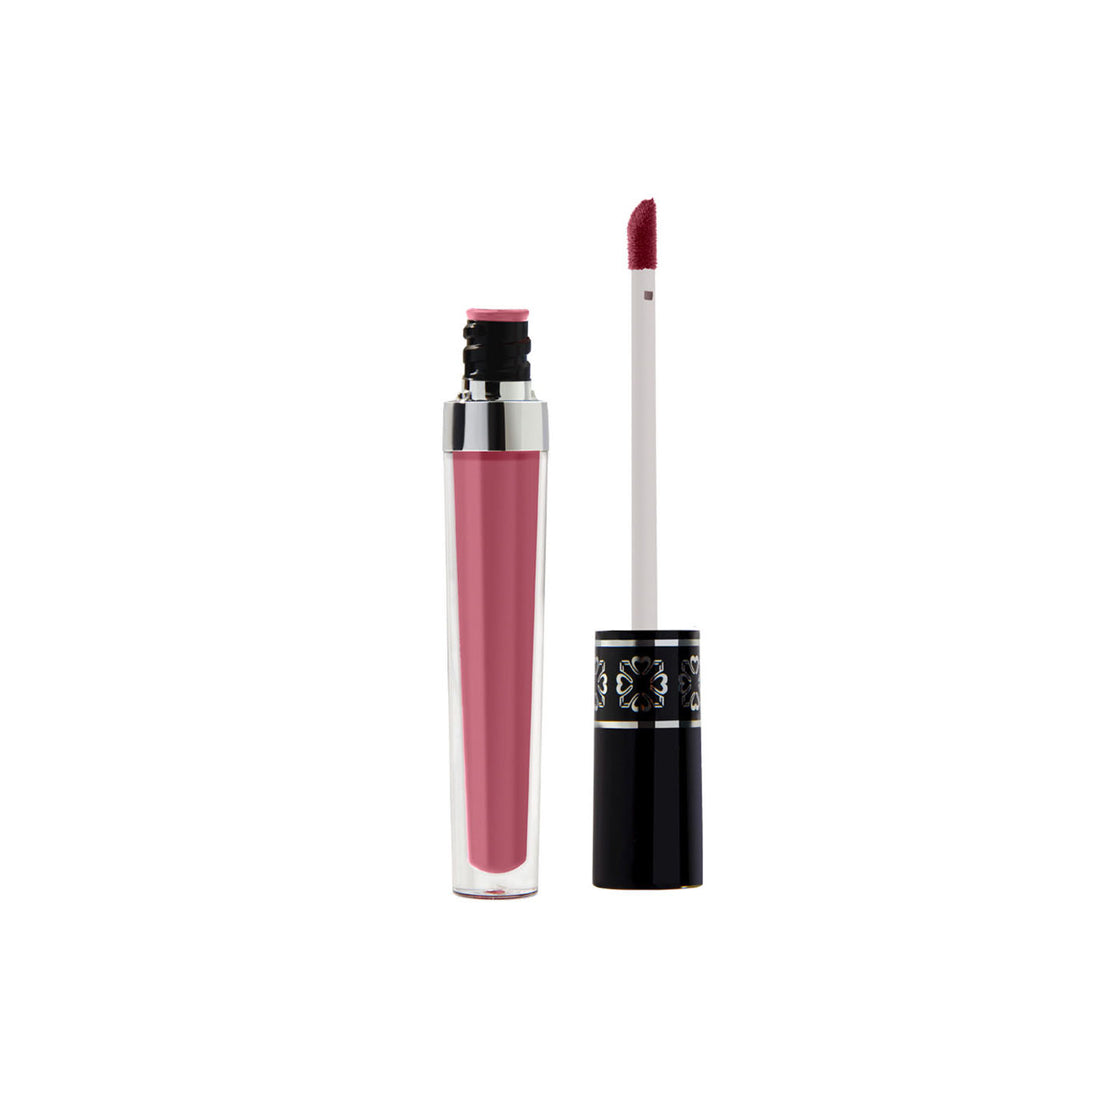 Daily Life Forever52 Lip Paint - Fm709 (8Ml)